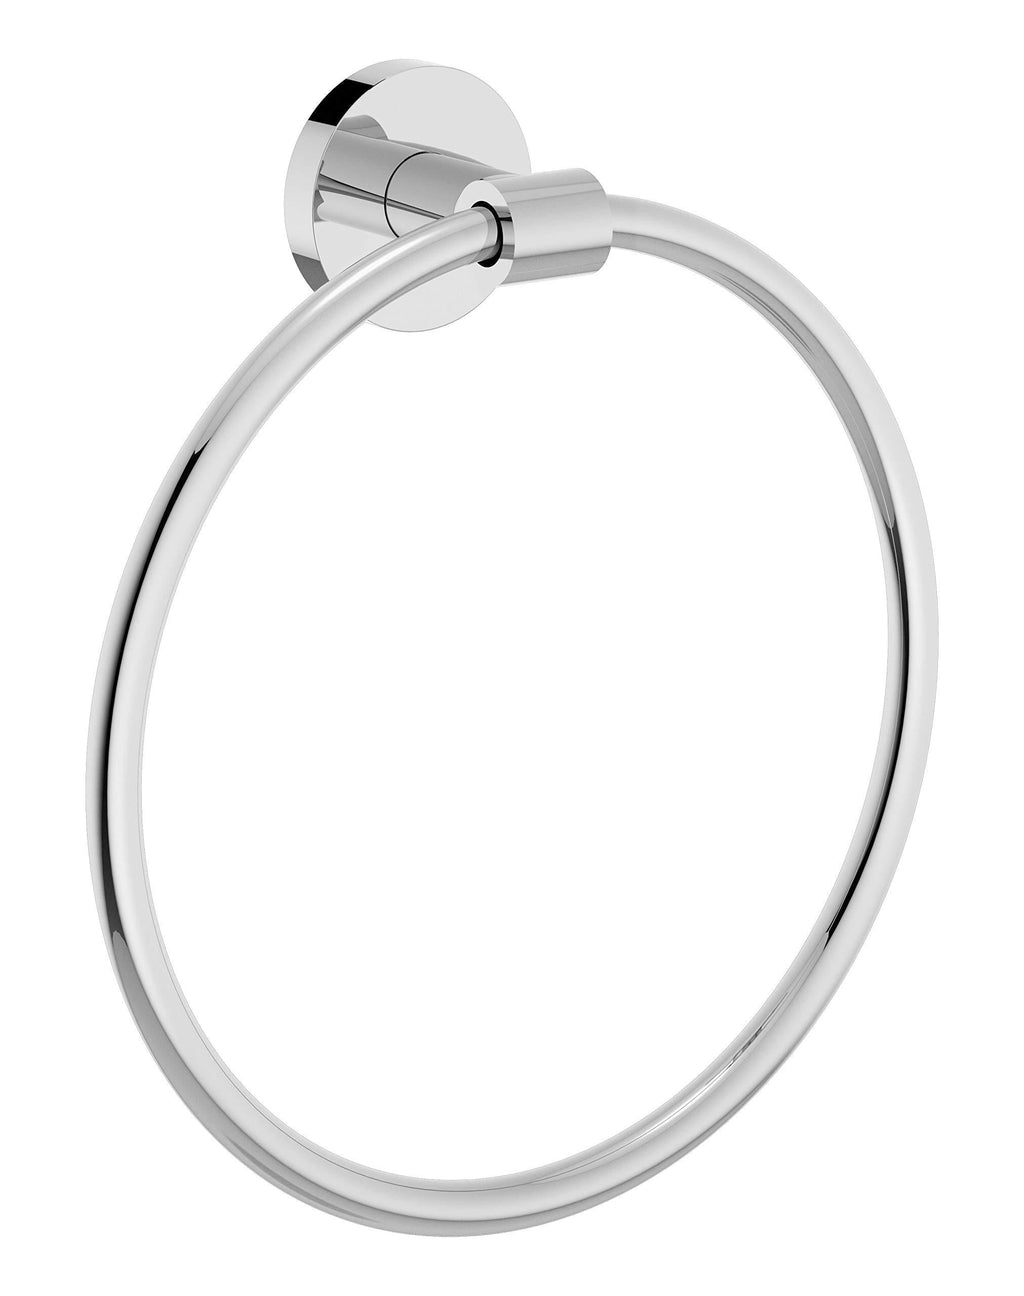 Symmons 673TR Identity Wall-Mounted Towel Ring in Polished Chrome - NewNest Australia